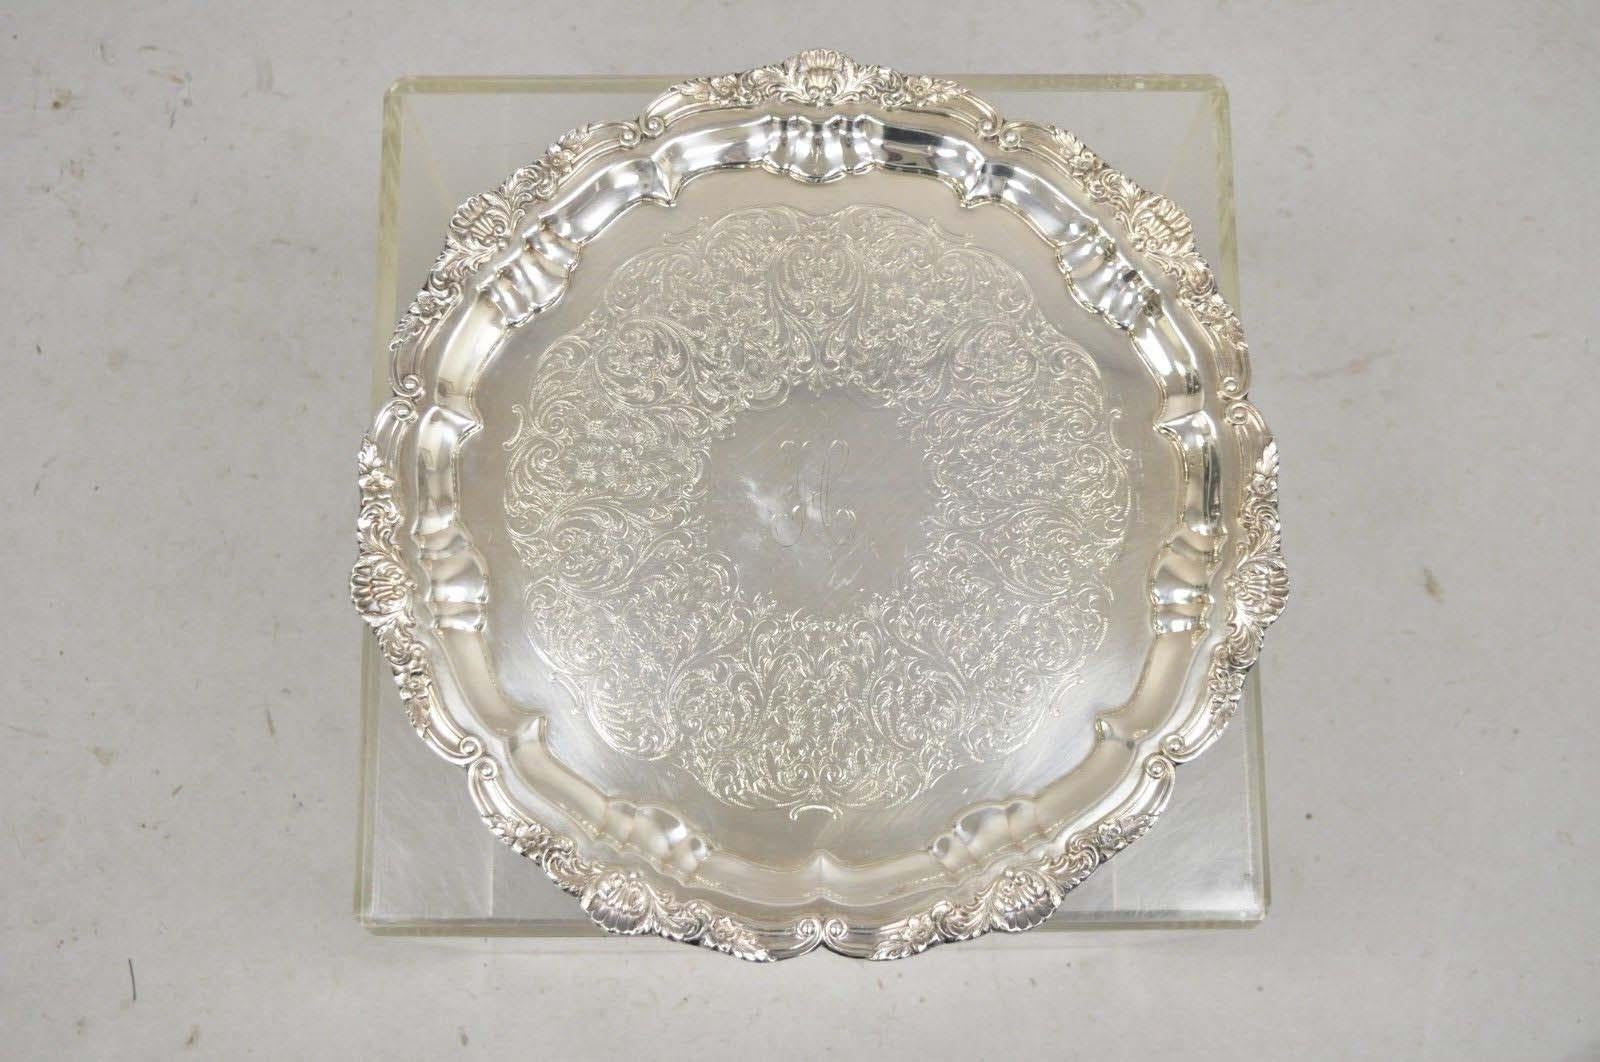 Vintage EPCA Silverplate by Poole 3216 Round Platter Tray - Engraved. Item features etched 